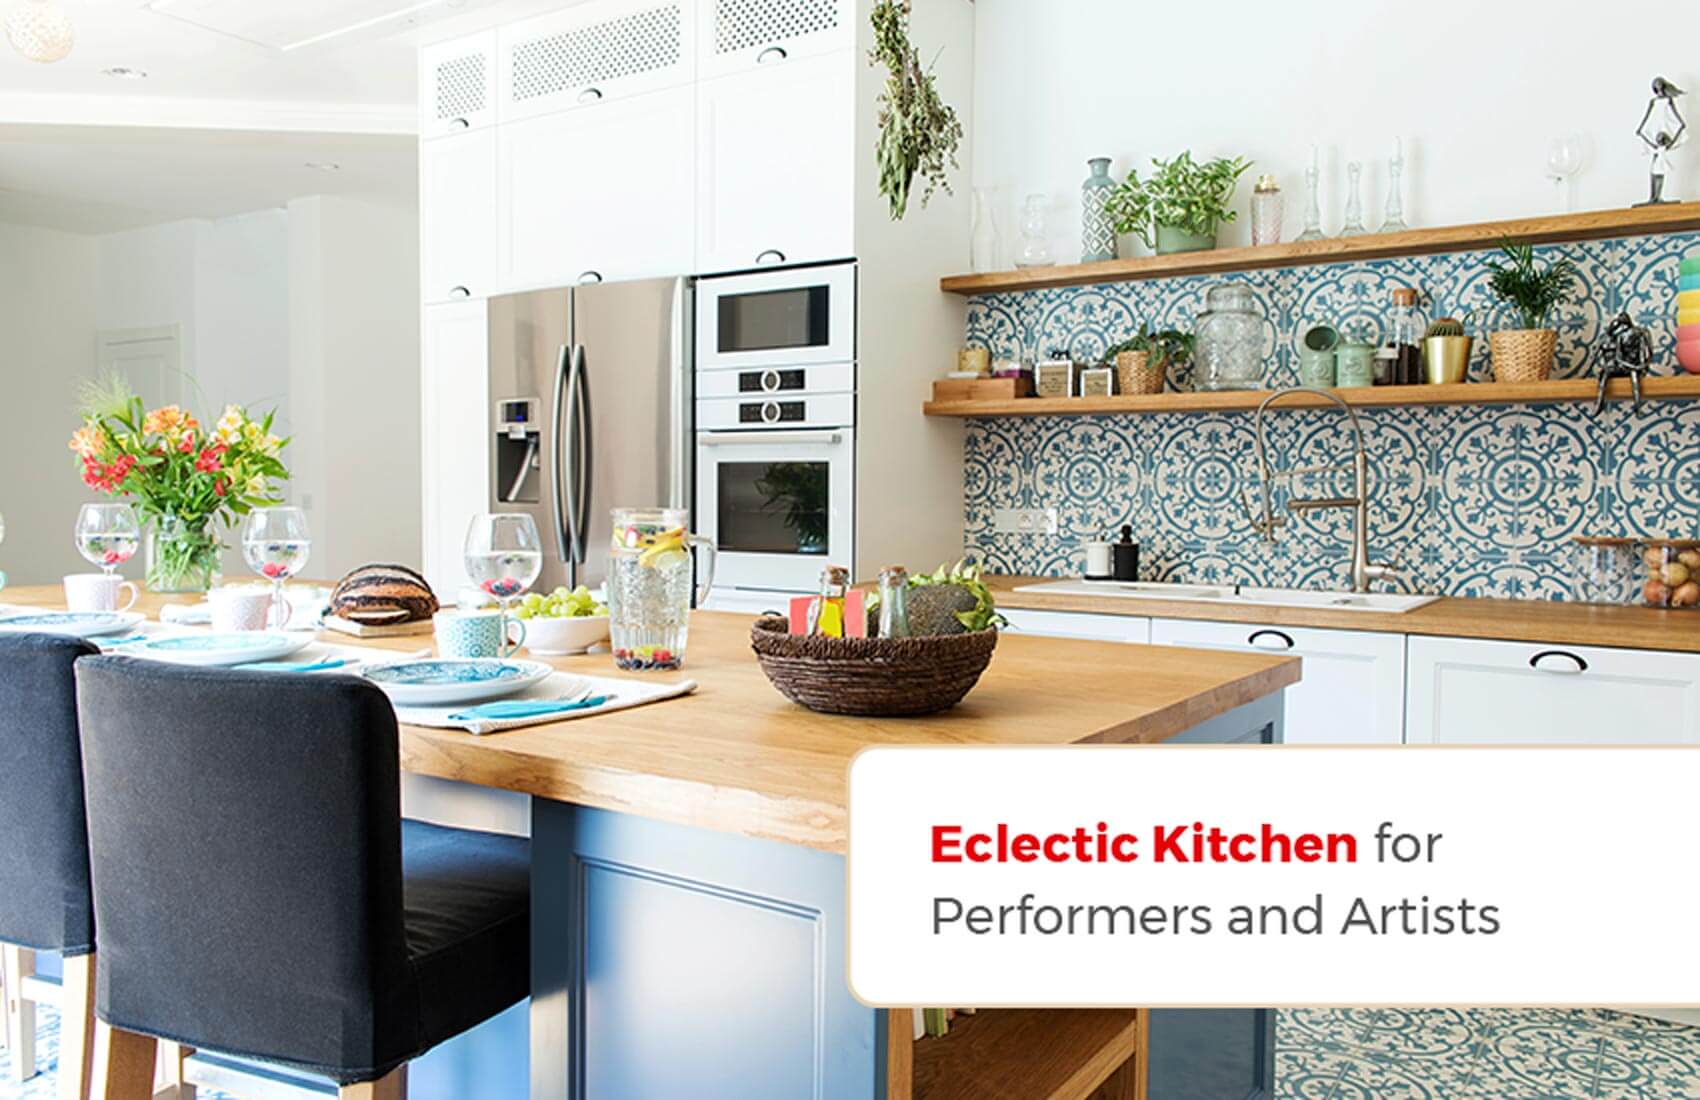 Eclectic kitchen.